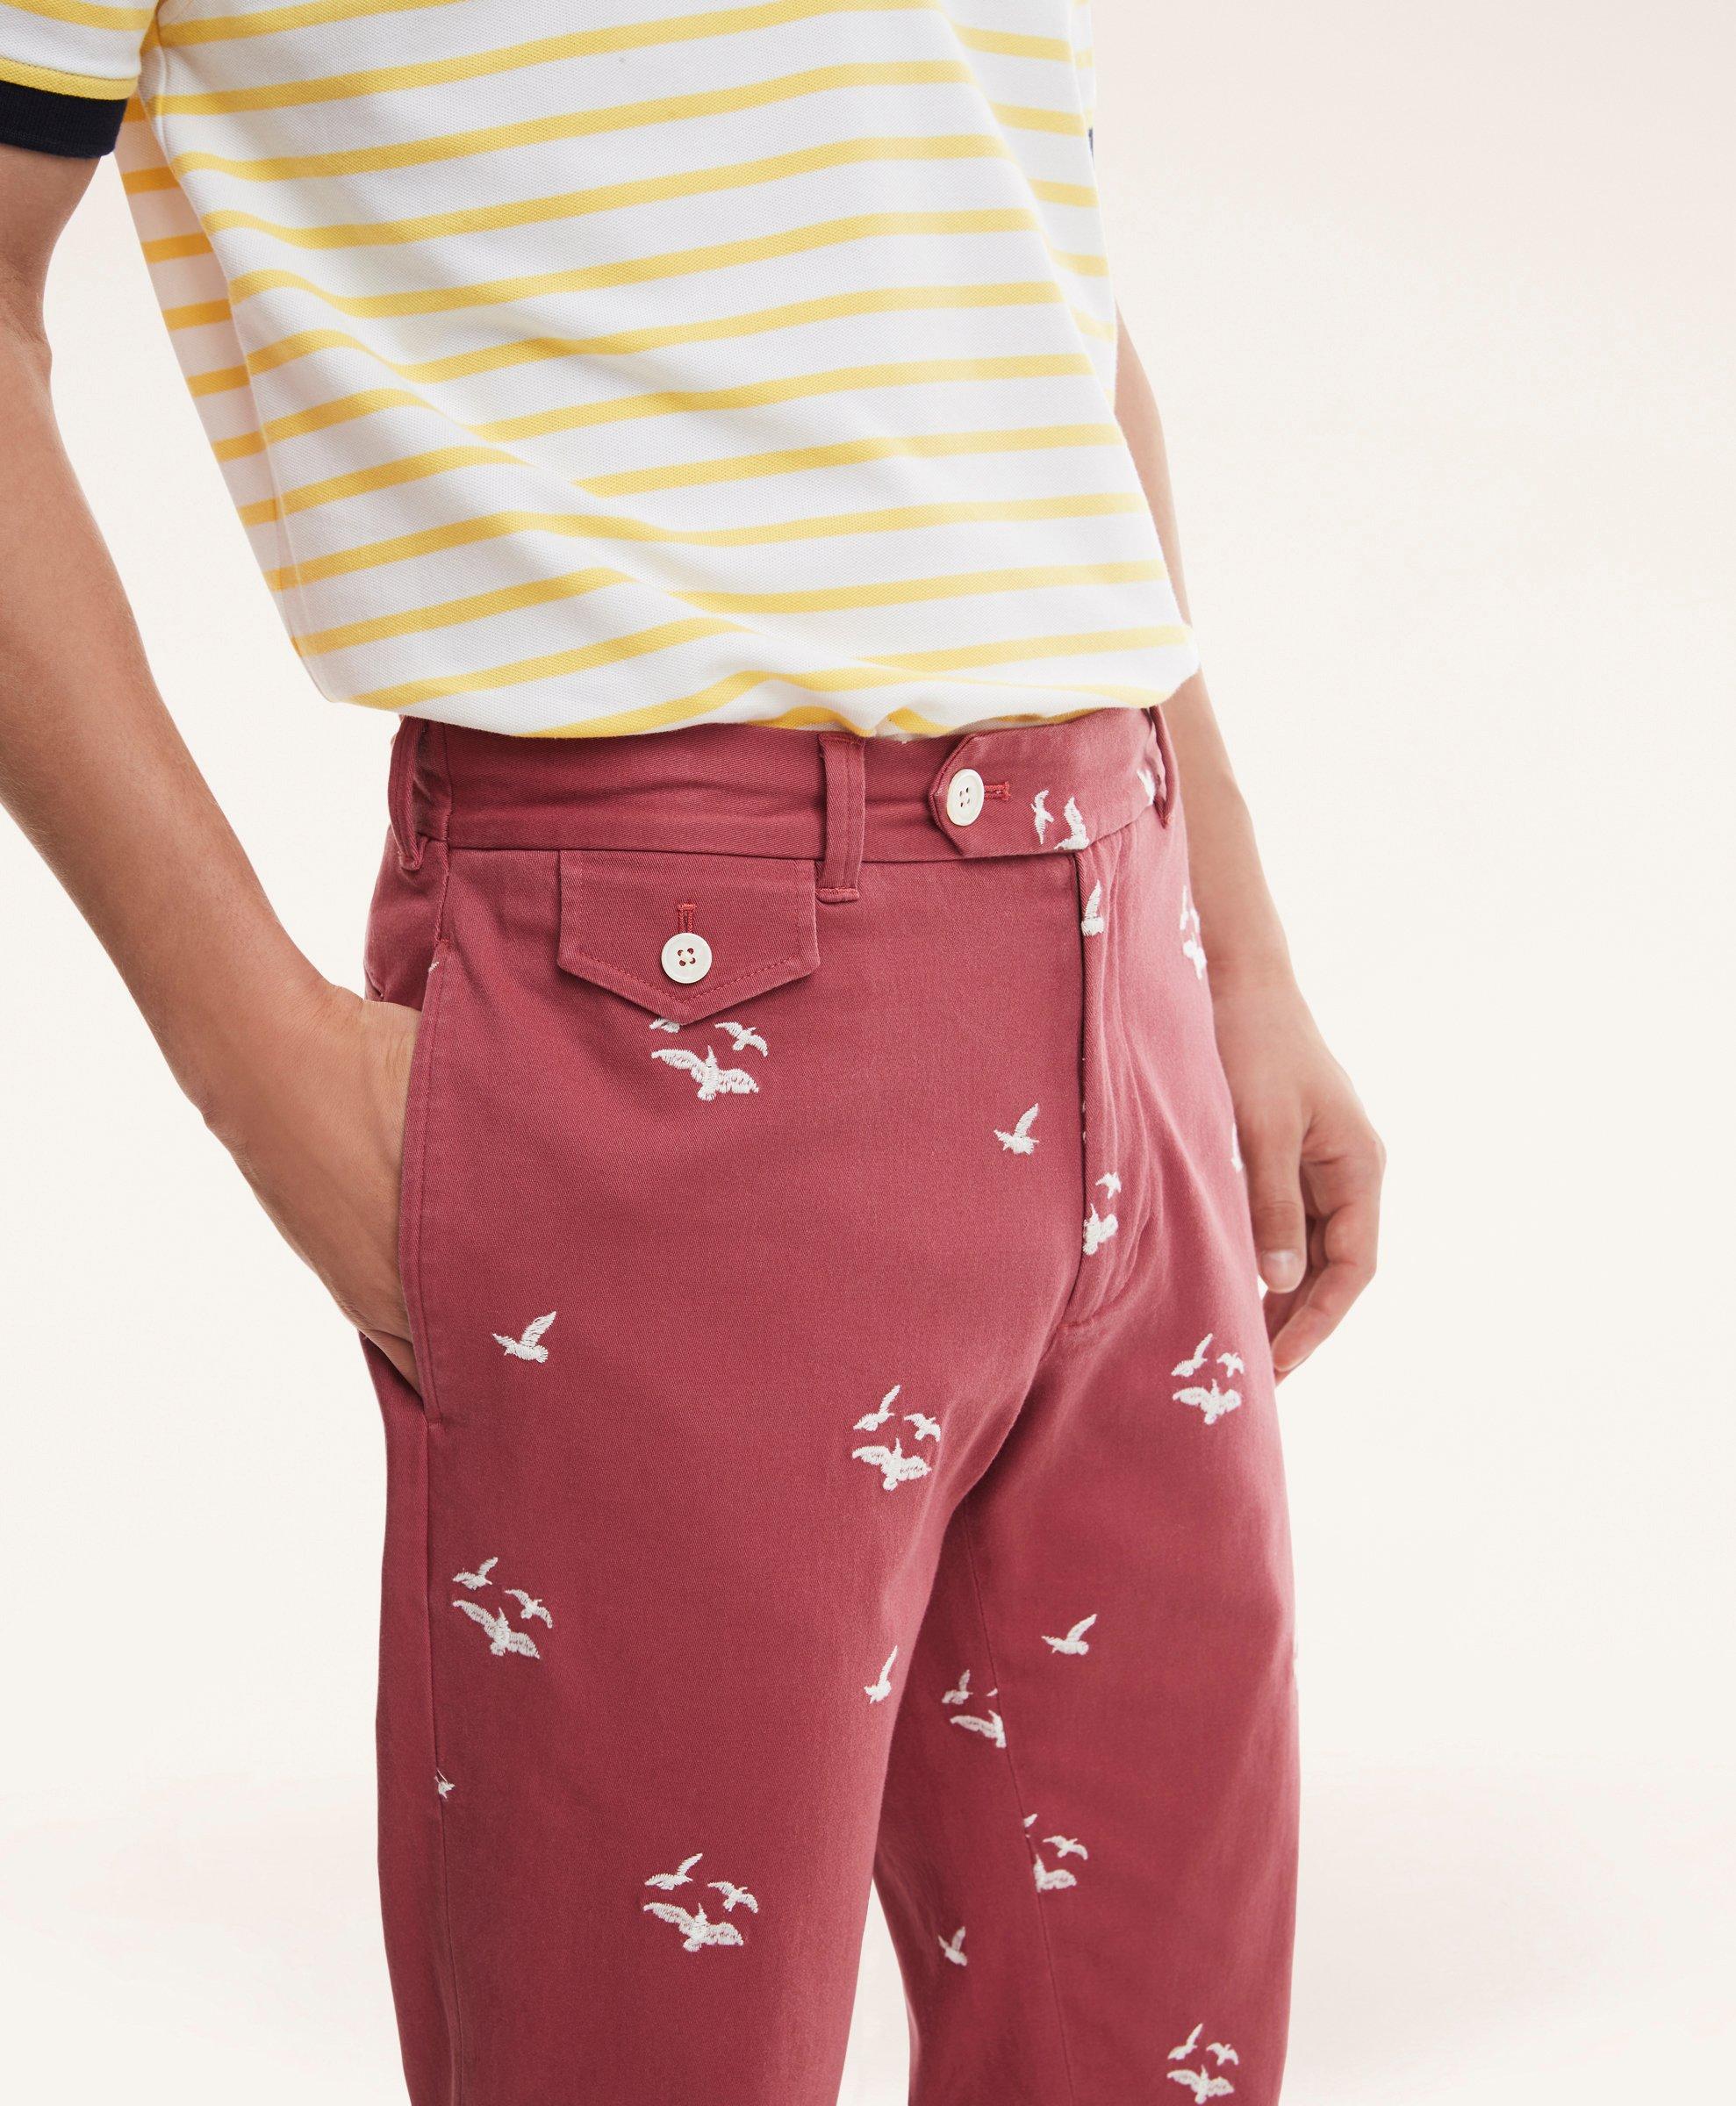 Milano Slim-Fit Stretch Cotton Seagull Embroidered Chinos, image 2